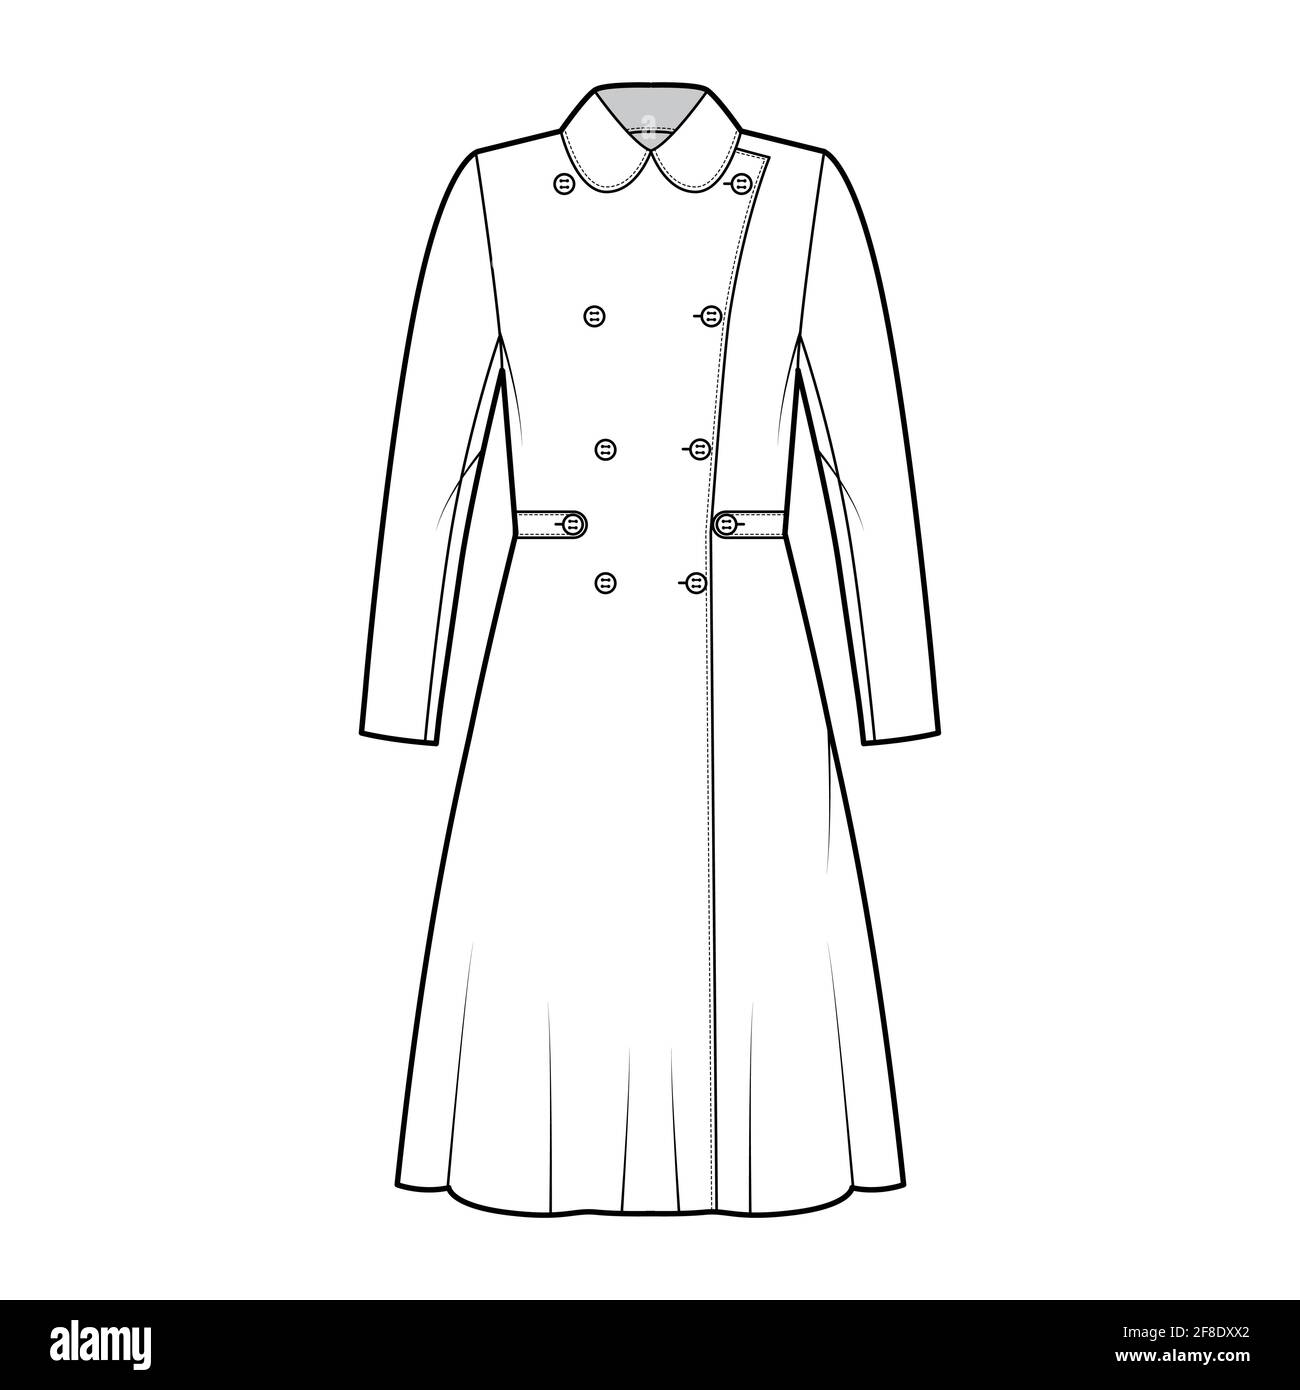 Skating coat technical fashion illustration with tabs, double breasted, round collar, knee length, A-line silhouette. Flat jacket template front, white color style. Women, men, unisex top CAD mockup Stock Vector